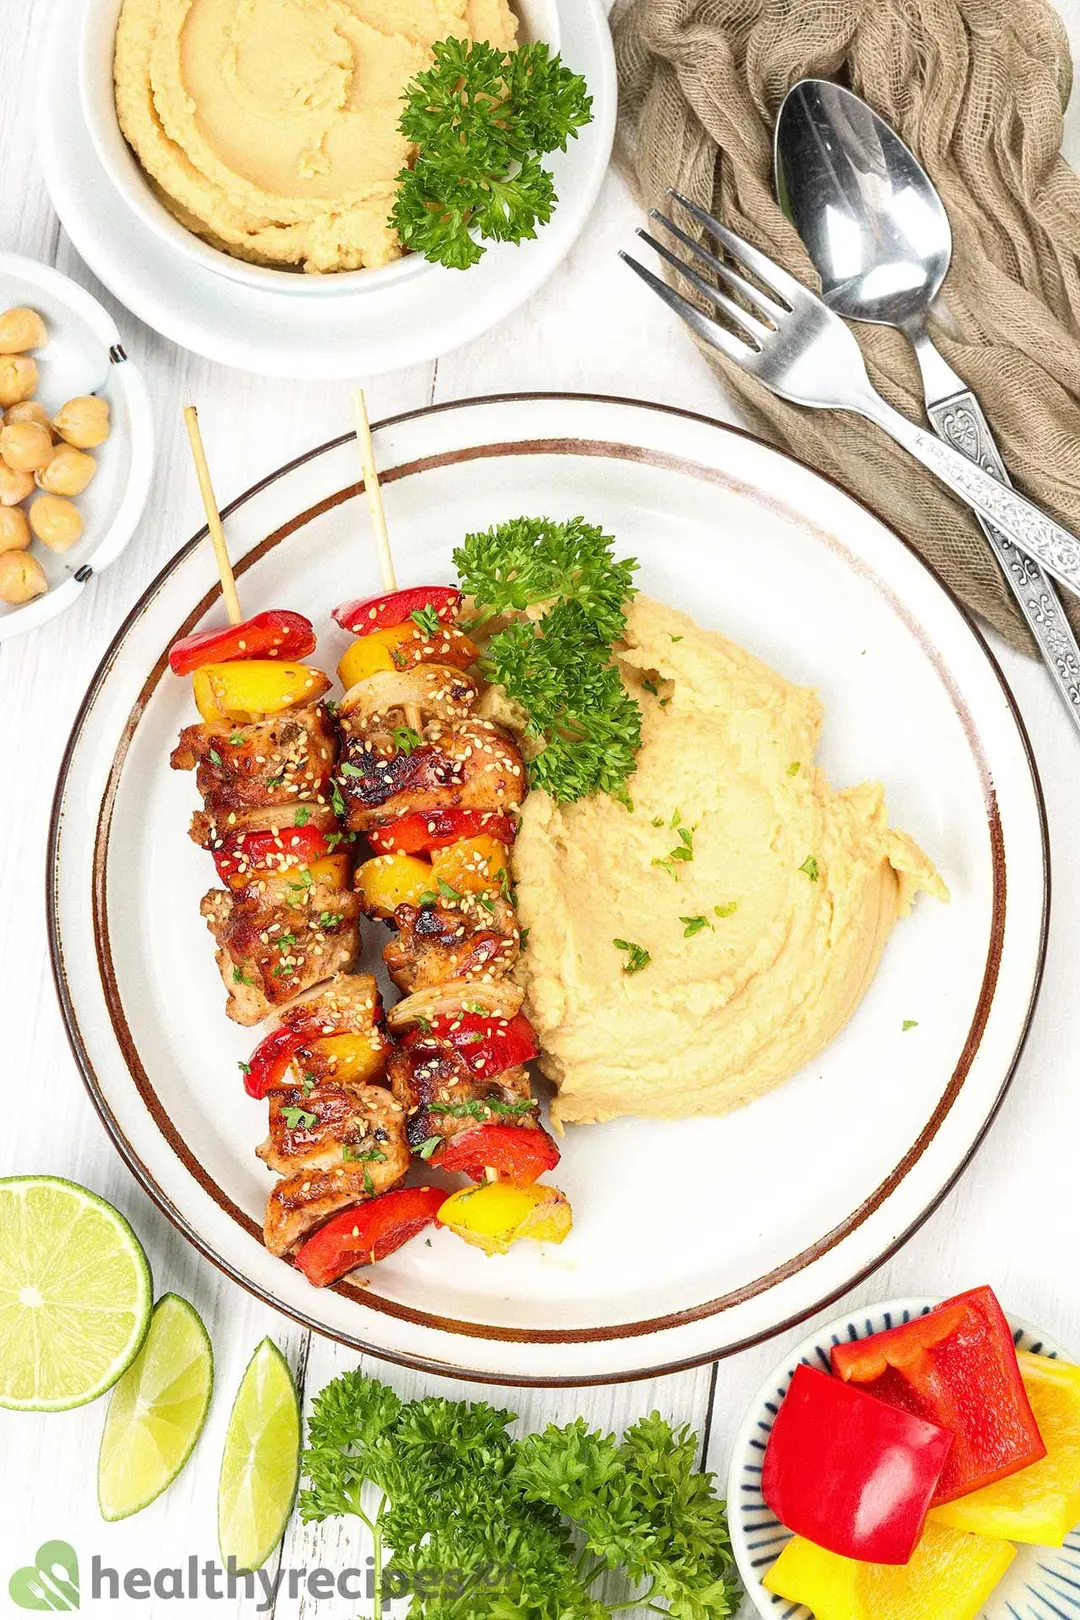 A top-down view of a plate of chicken skewers and chickpea puree alongside a bowl of chickpea puree and other utensils